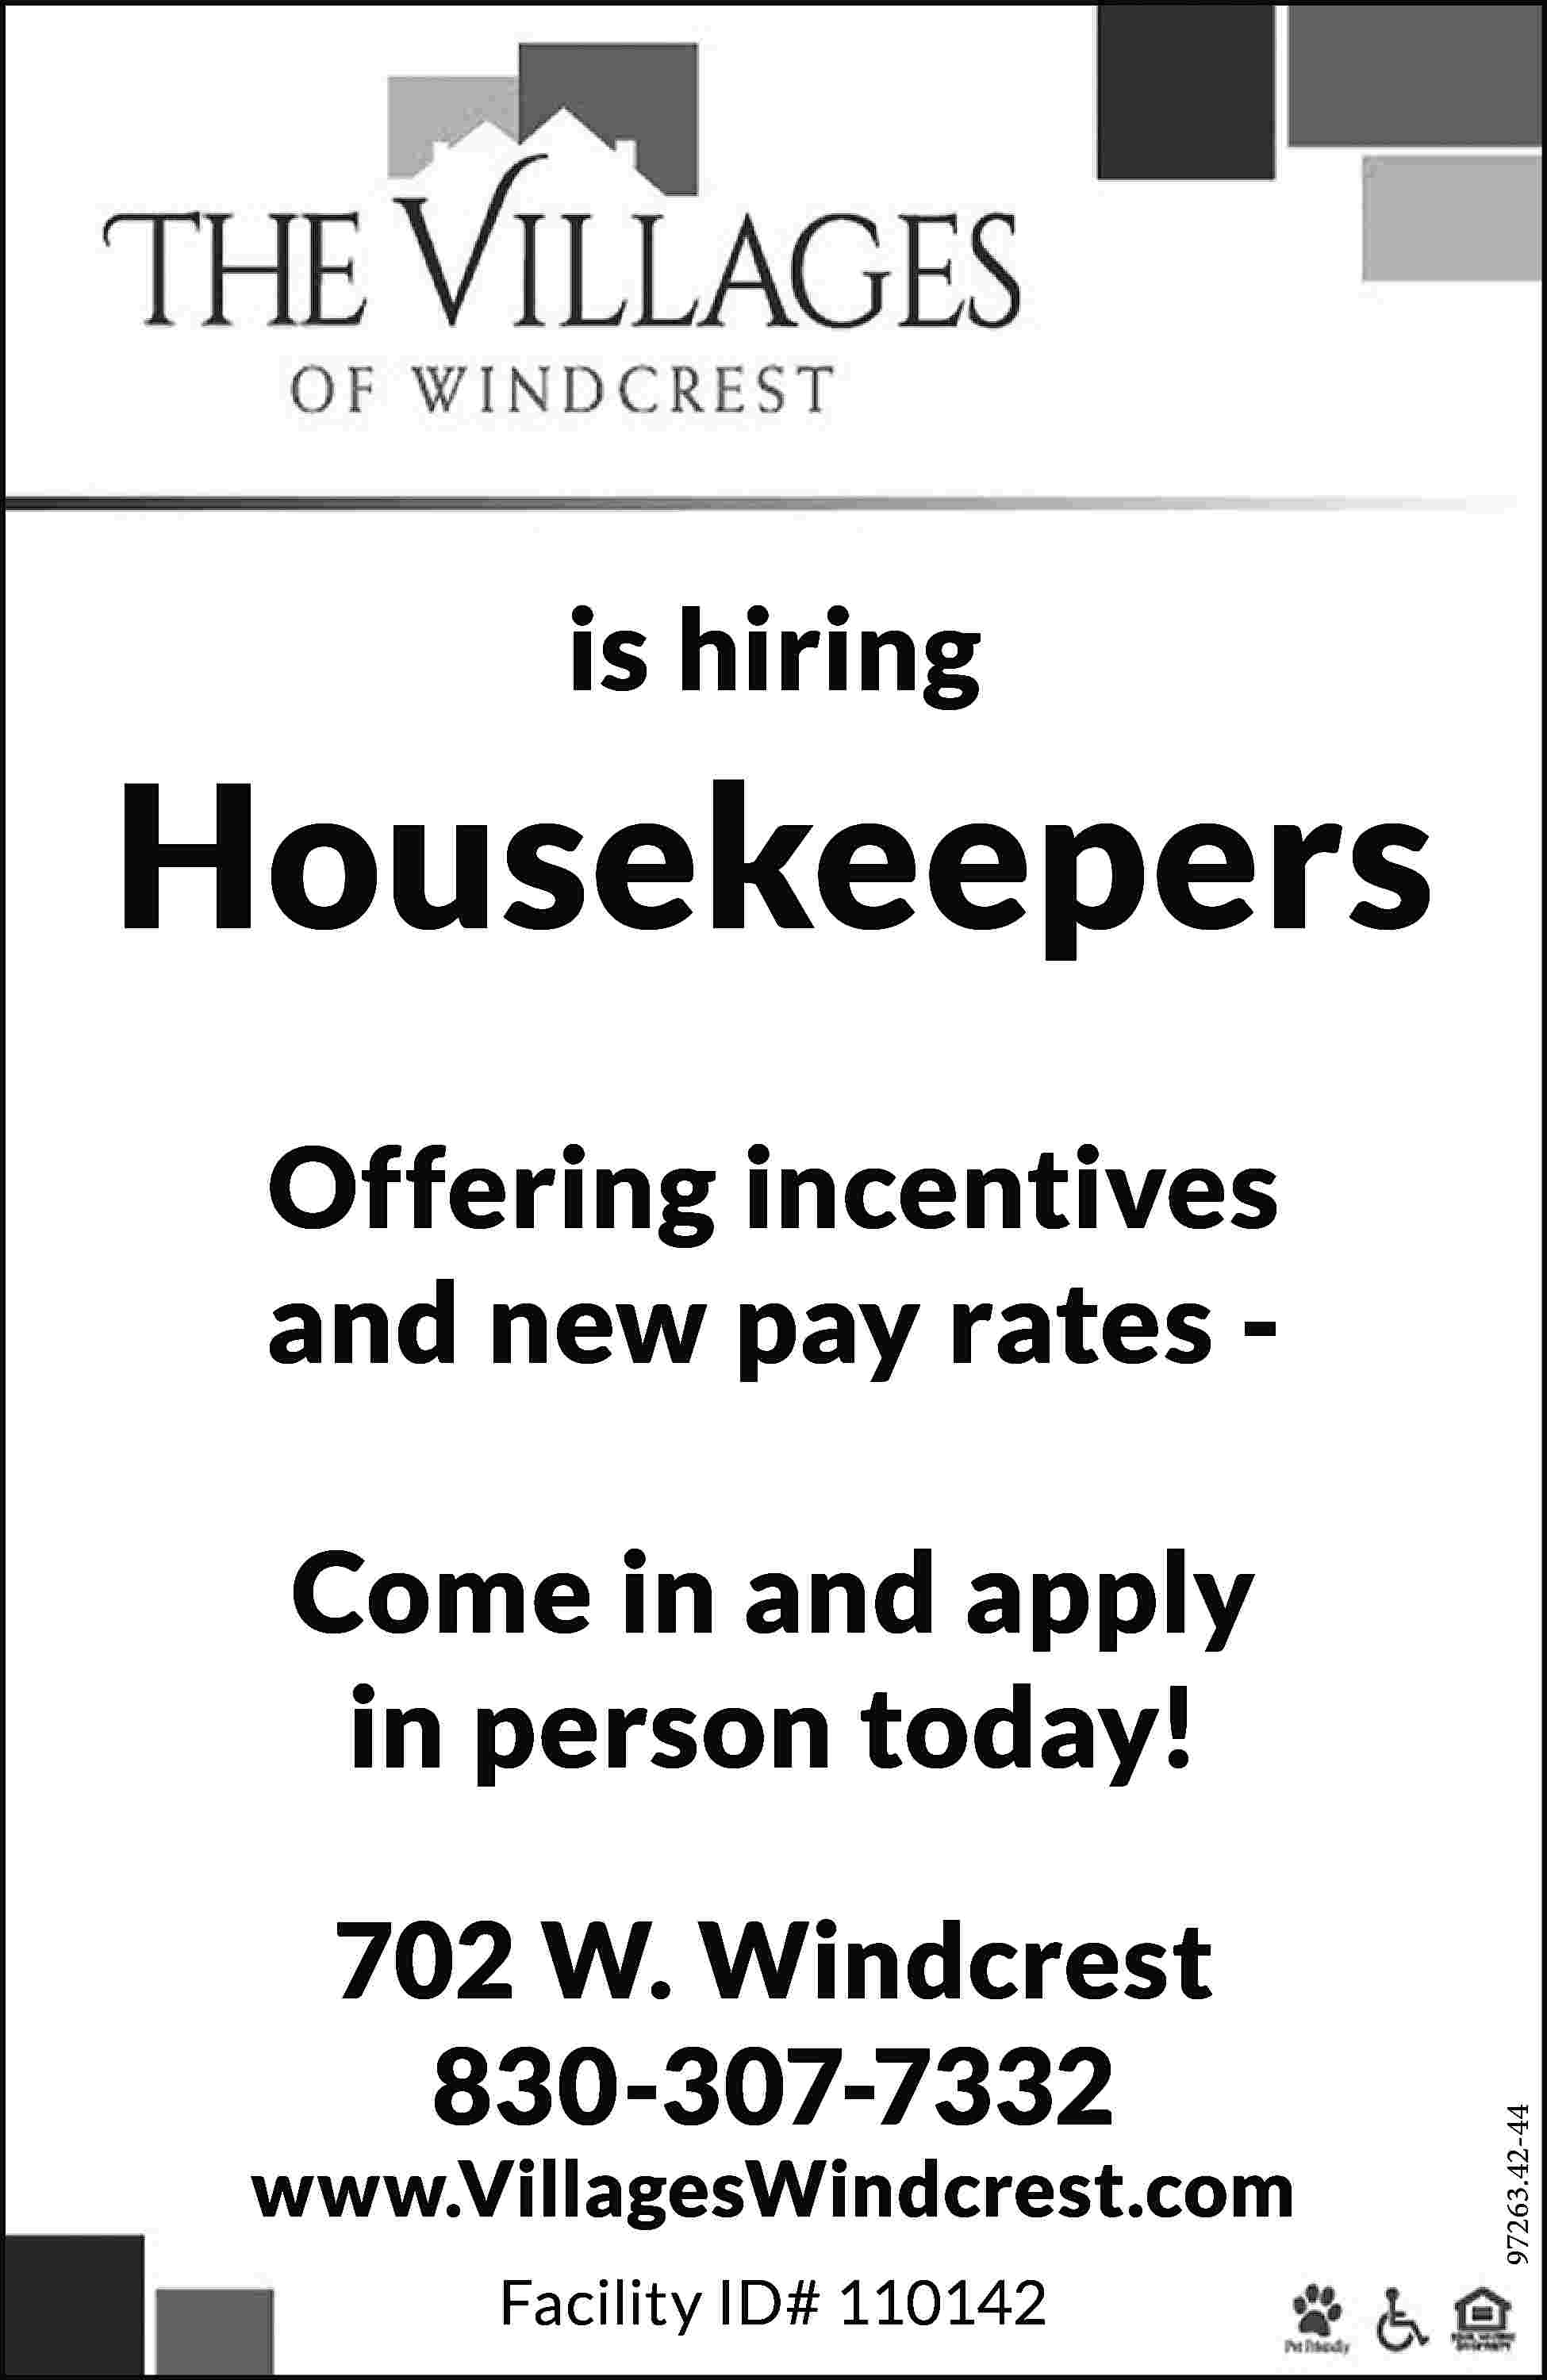 is hiring Housekeepers Offering incentives  is hiring Housekeepers Offering incentives and new pay rates - 702 W. Windcrest 830-307-7332 www.VillagesWindcrest.com Facility ID# 110142 97263.42-44 Come in and apply in person today!